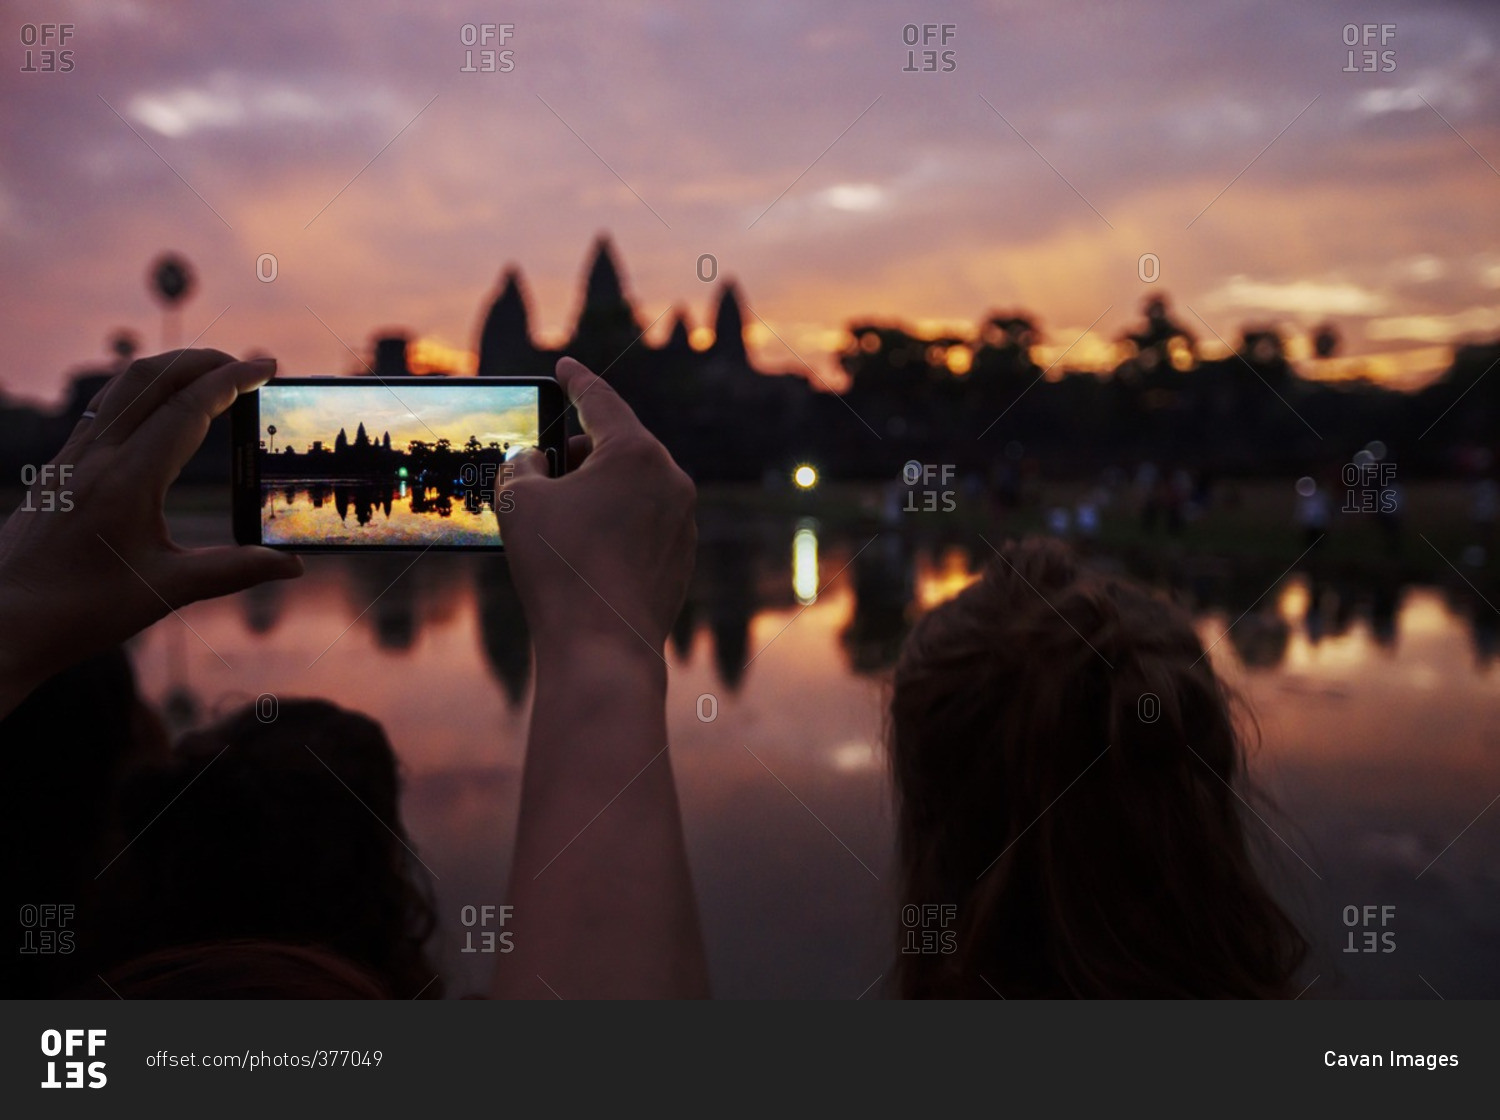 Cropped image of tourist photographing silhouette Angkor Wat temple during sunset